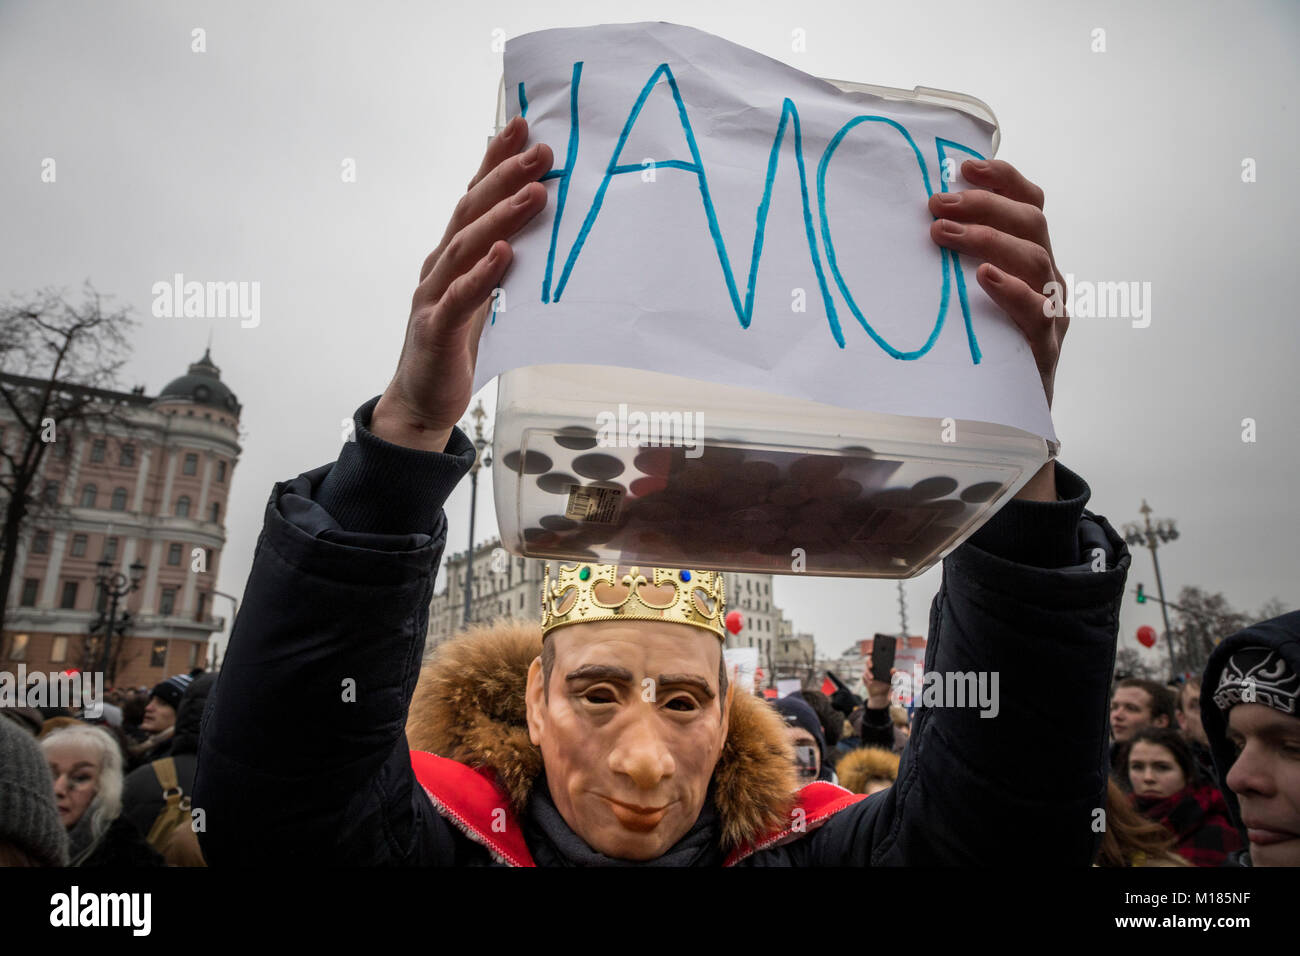 Moscow, Russia. 28th Jan, 2018. Supporters of opposition leader Alexei Navalny in mask of Vladimir Putin take part in a rally calling for a boycott of March 18 presidential elections, in Moscow Credit: Nikolay Vinokurov/Alamy Live News Stock Photo